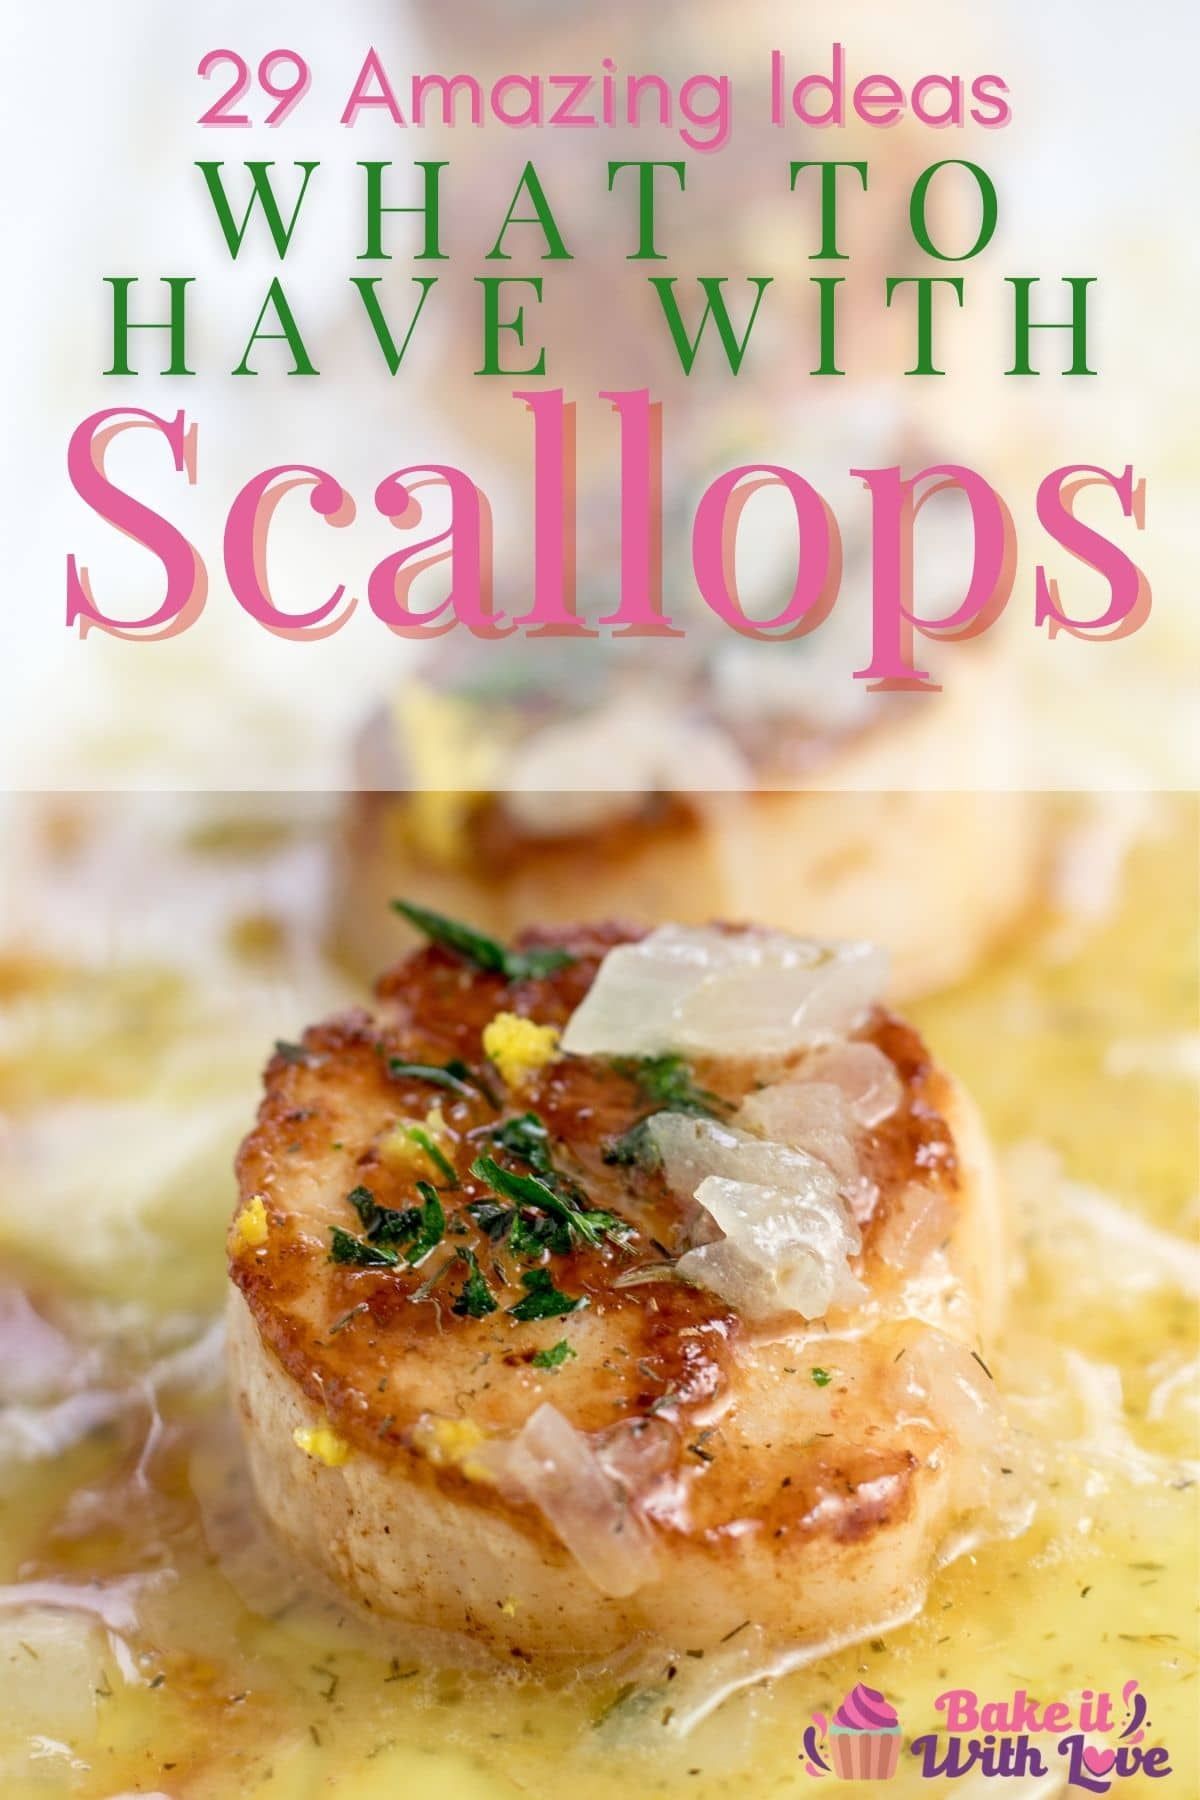 35+ of the Very Best Side Dishes and Desserts to Serve With Scallops